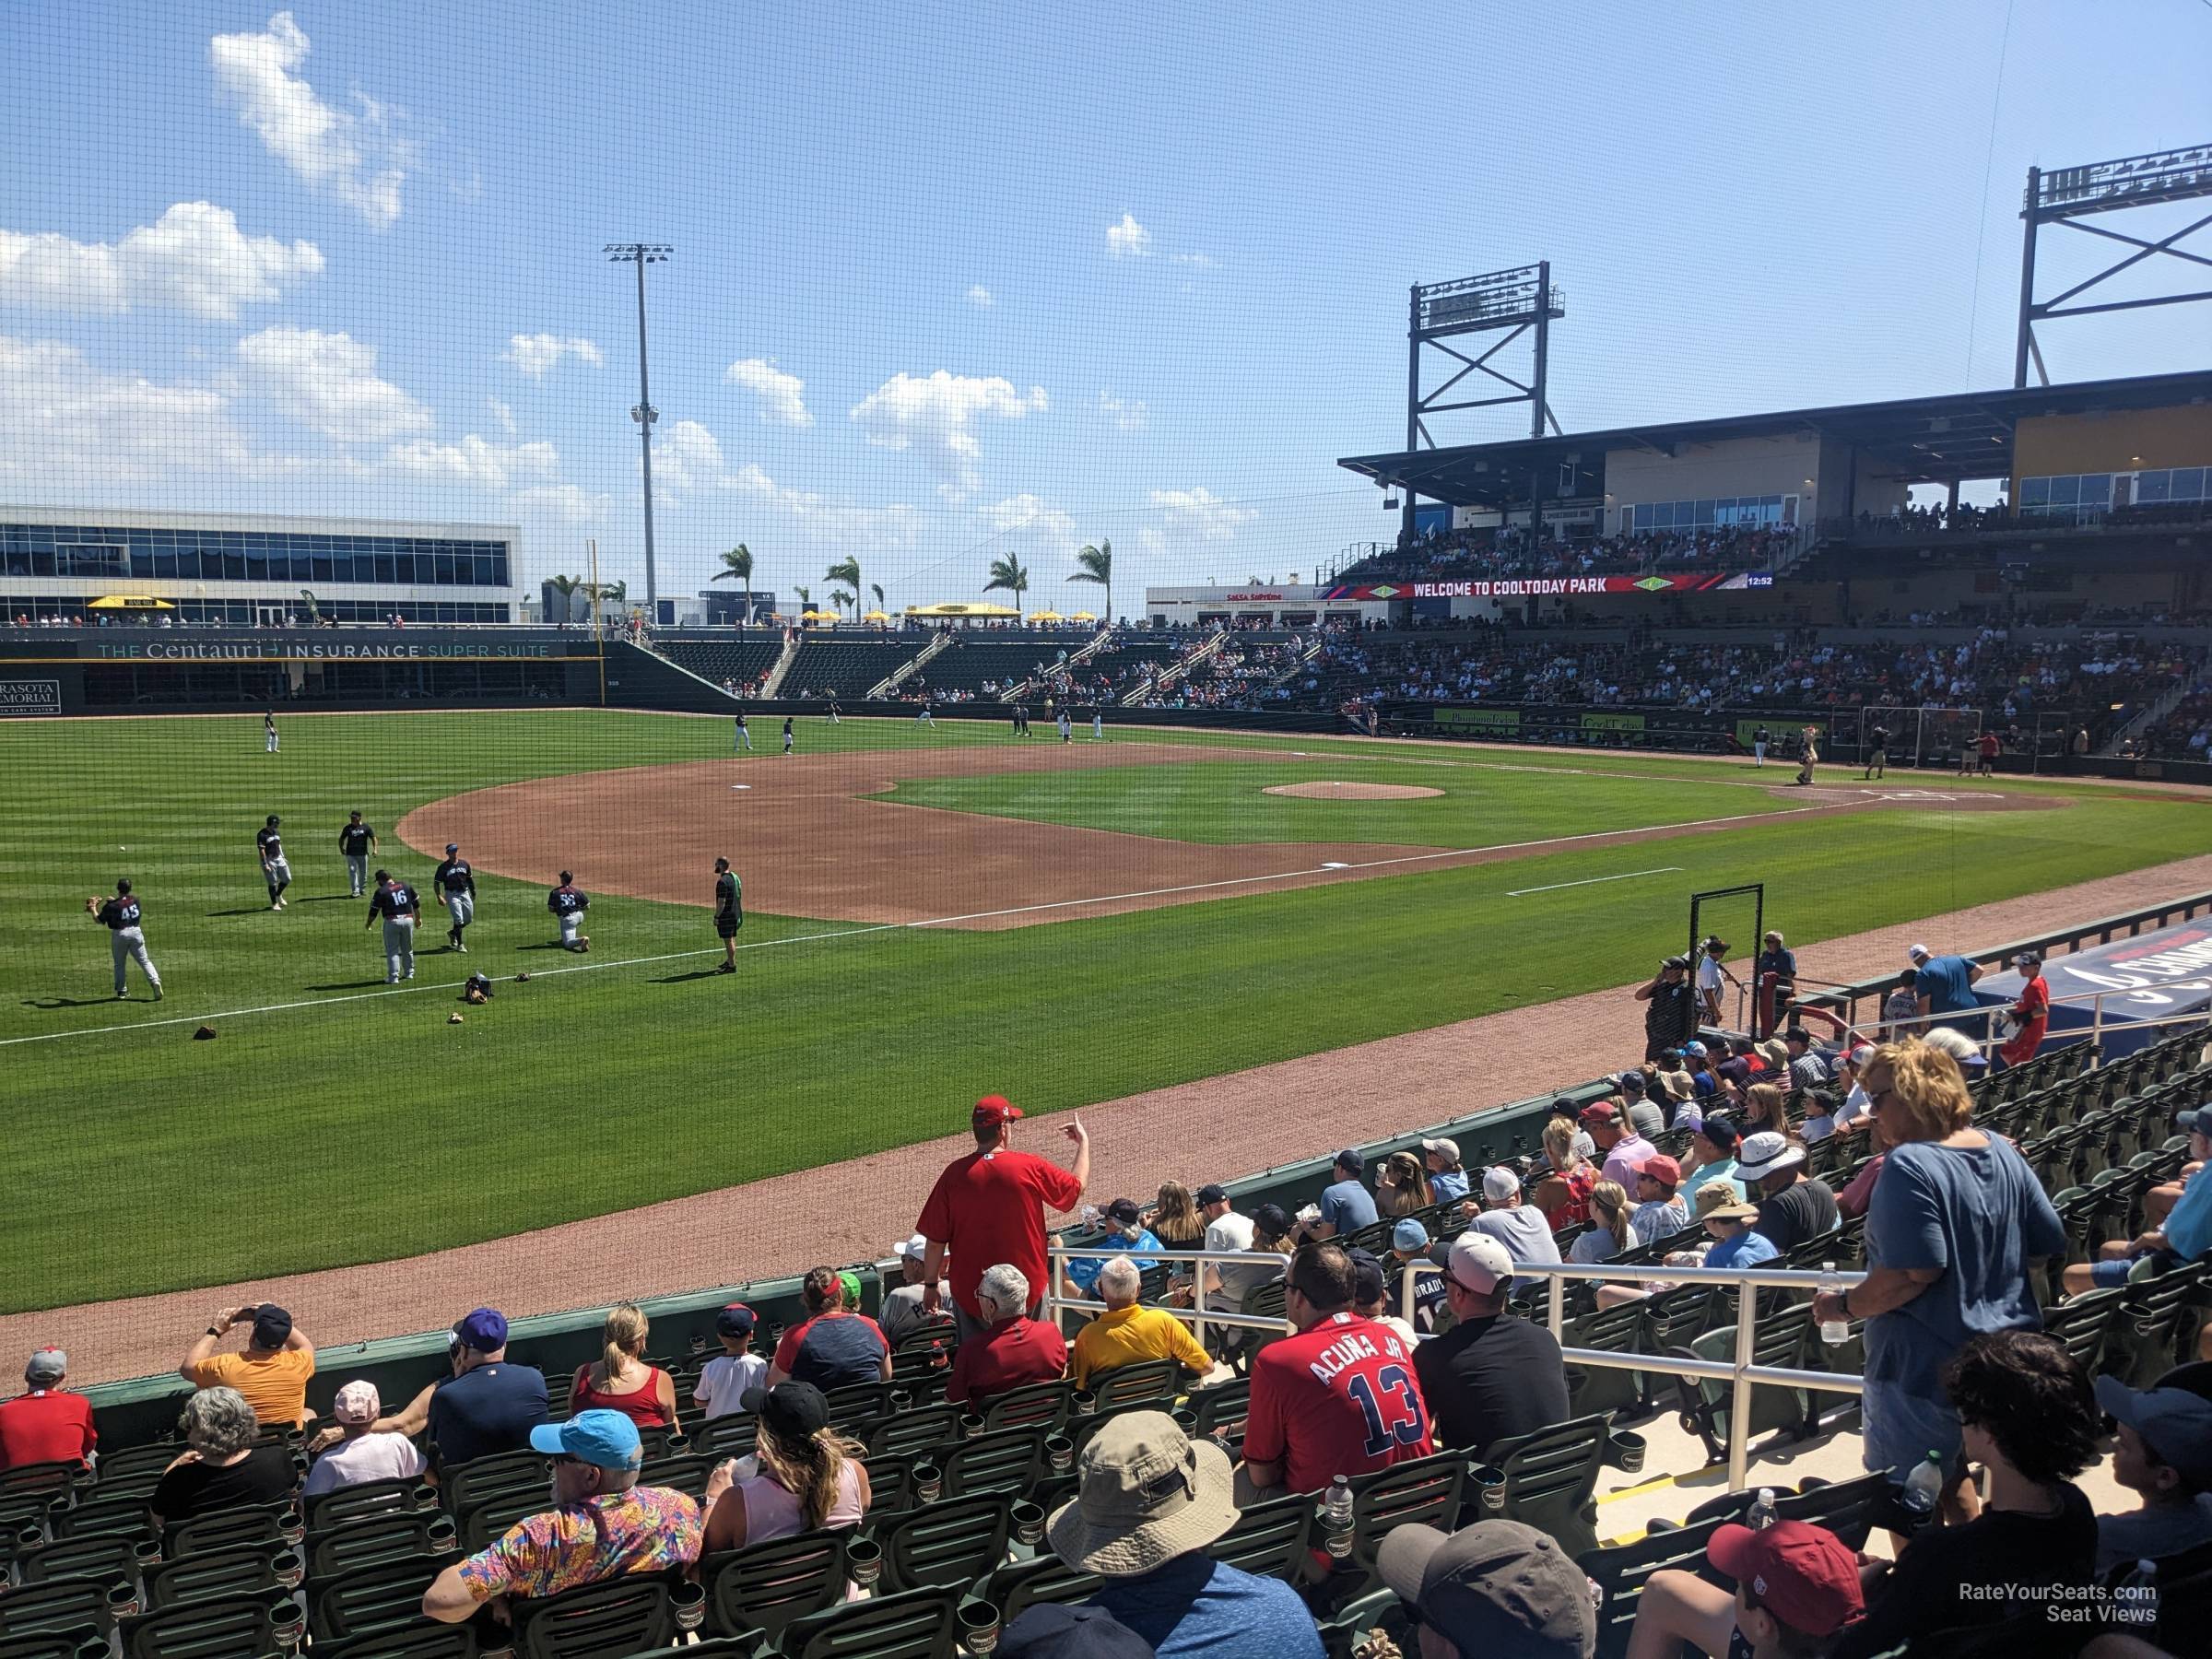 section 119, row 13 seat view  - cooltoday park